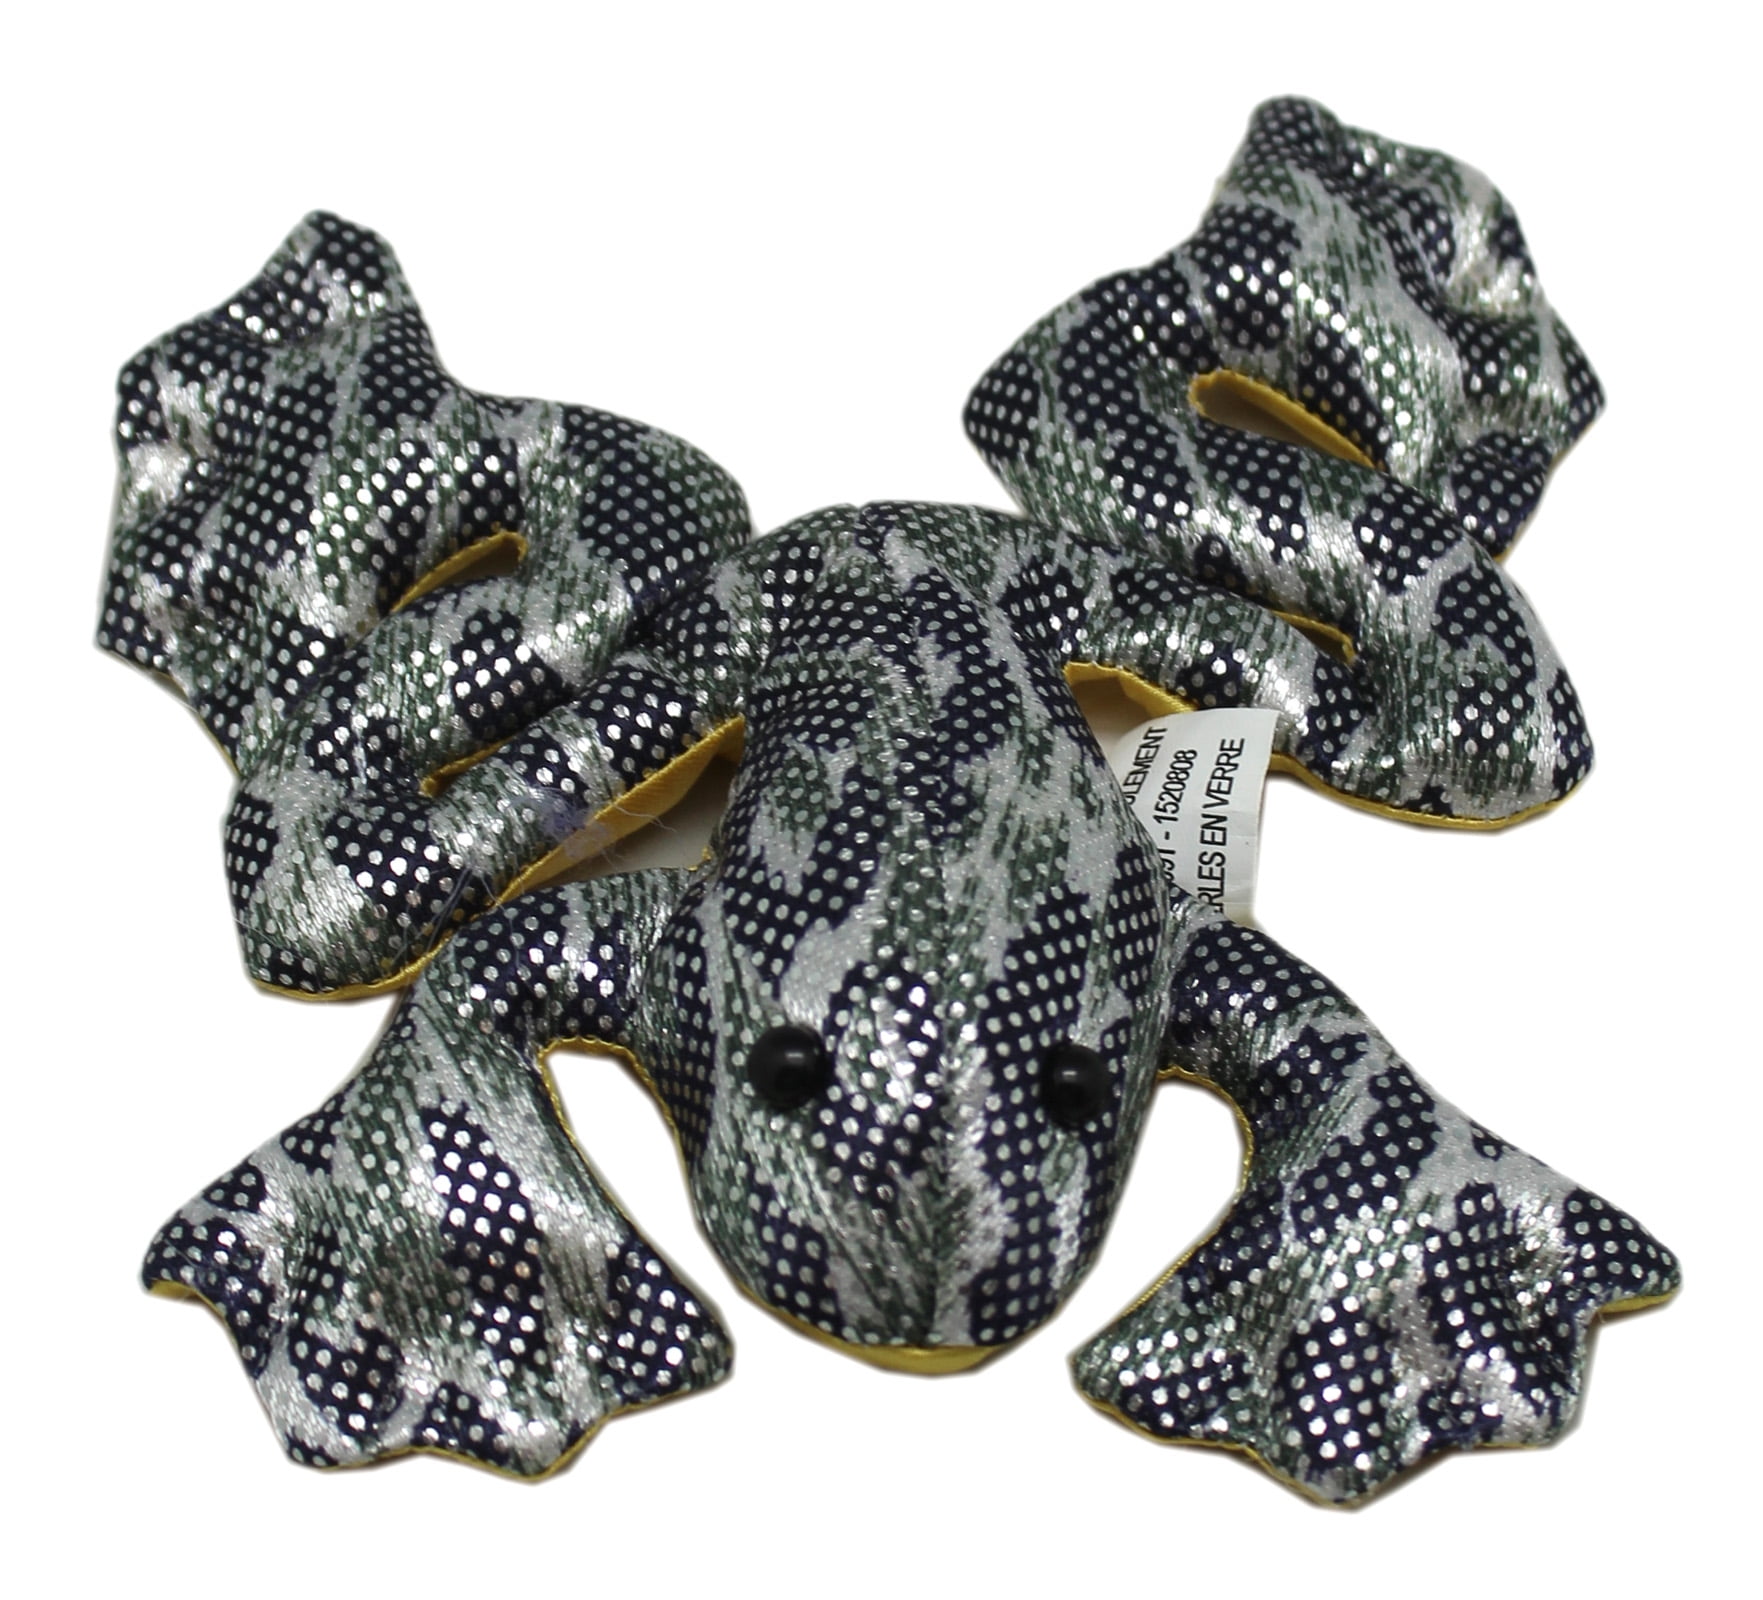 Glitter Snake Sand Animal Stress Relief Toy Silver Blue Coloured Paperweight 